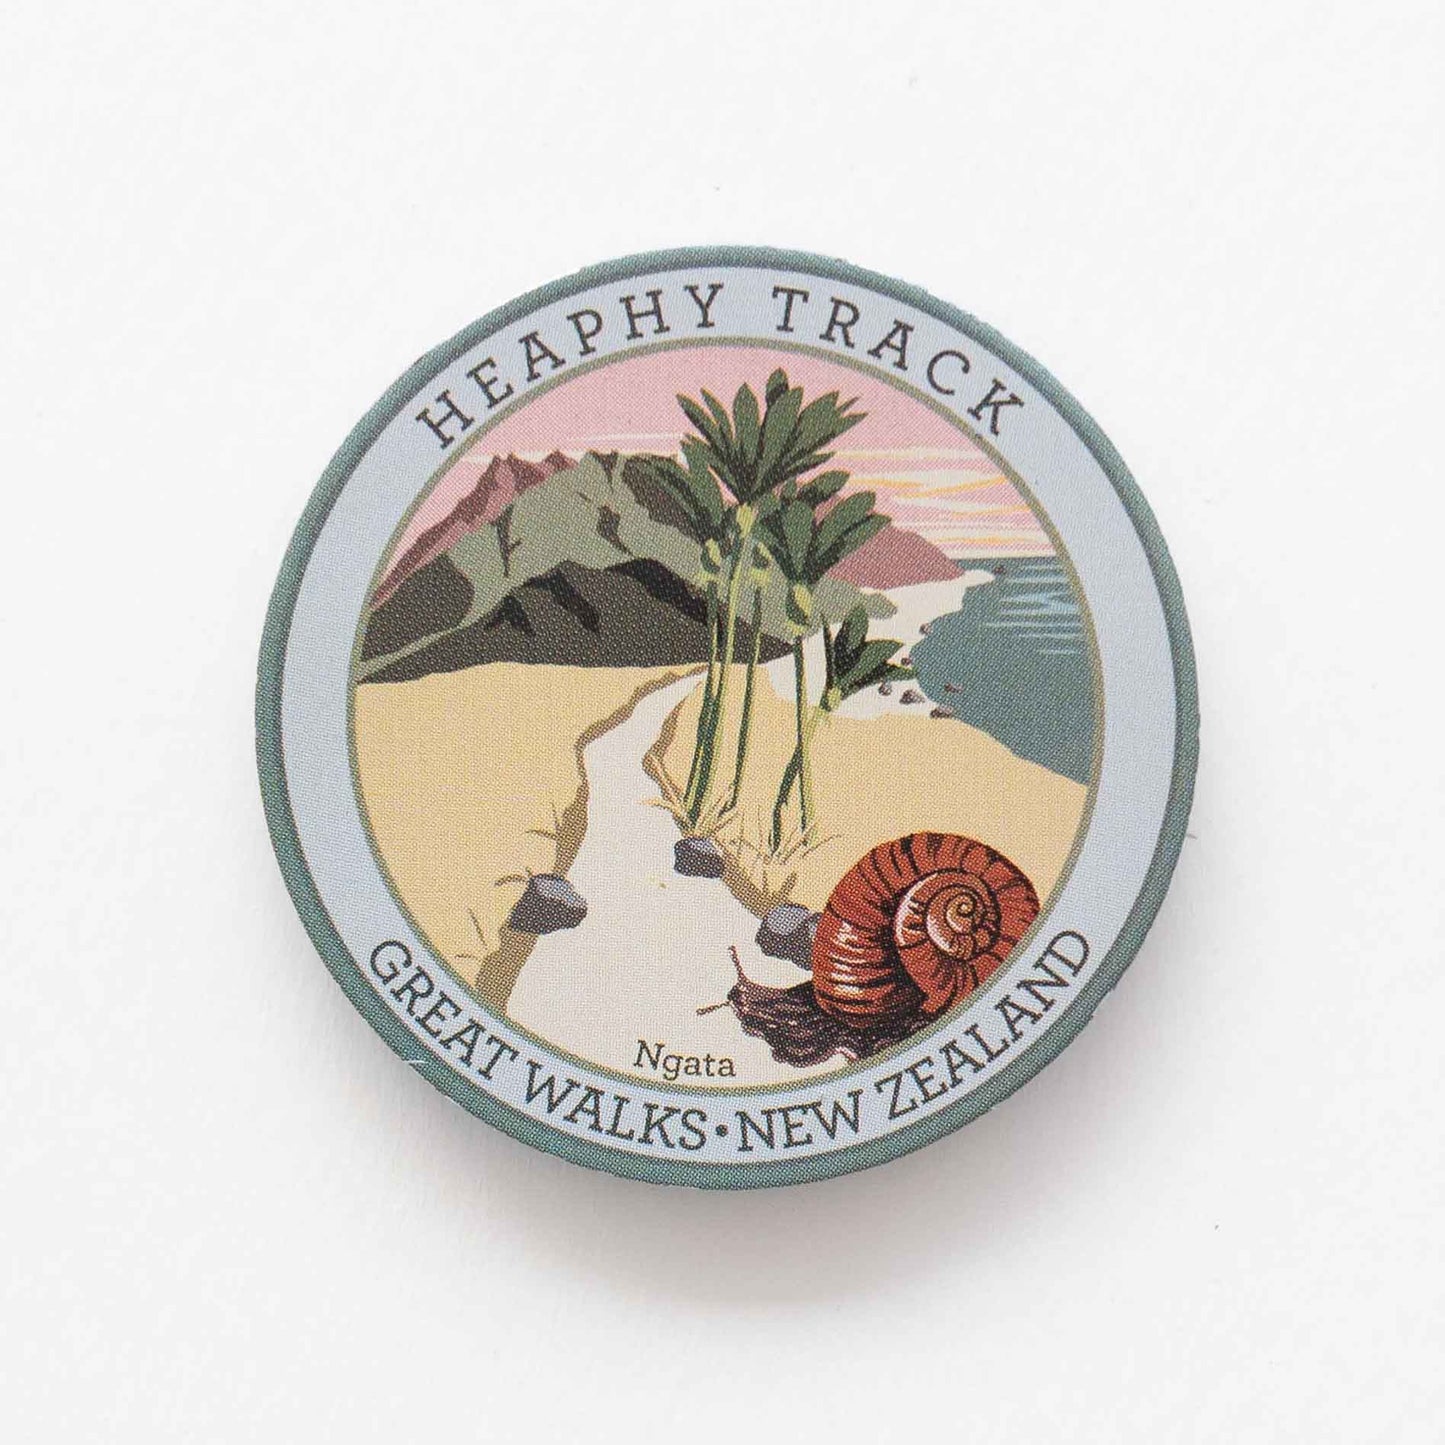 Round Heaphy Track pin, with a snail, nikau palms, green hills and pink sky.